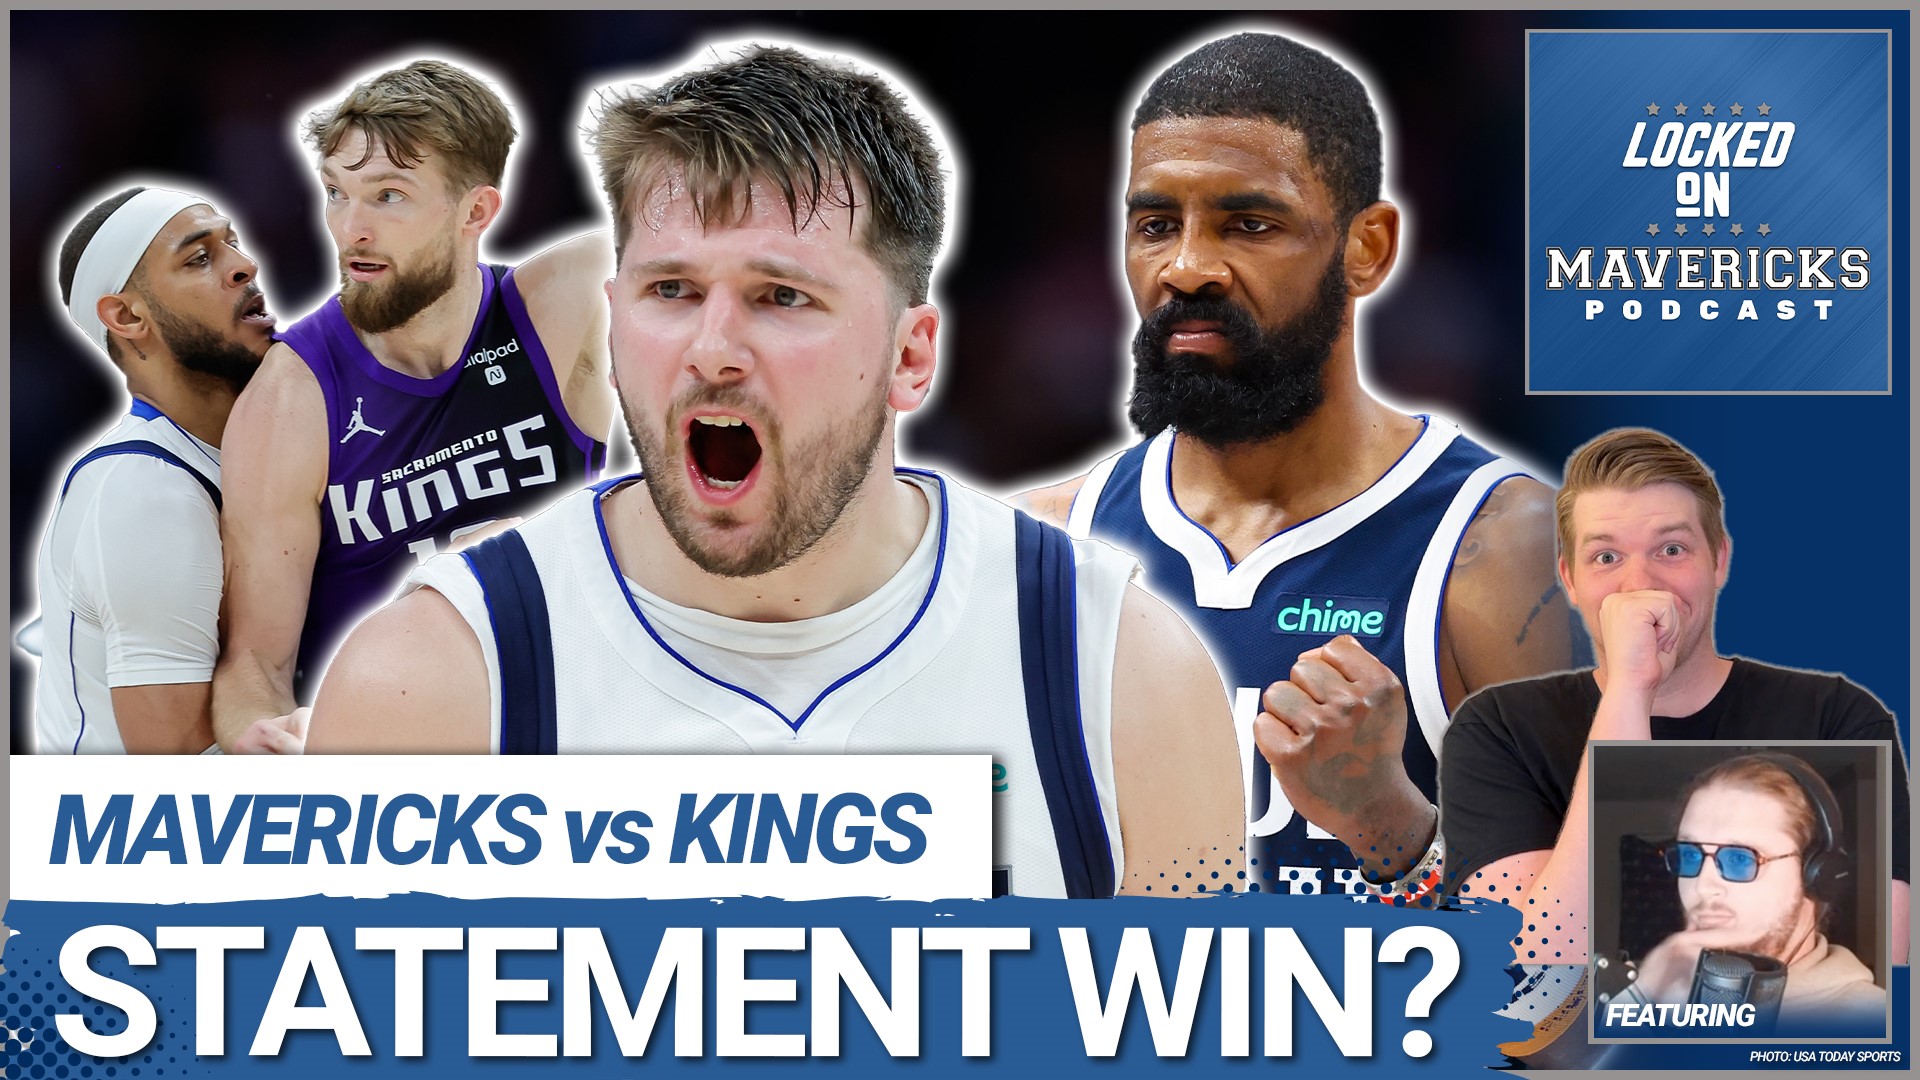 Nick Angstadt & Slightly Biased breakdown the Dallas Mavericks' win over the Sacramento Kings and how Luka Doncic & Kyrie Irving led the Mavs in the 3rd.